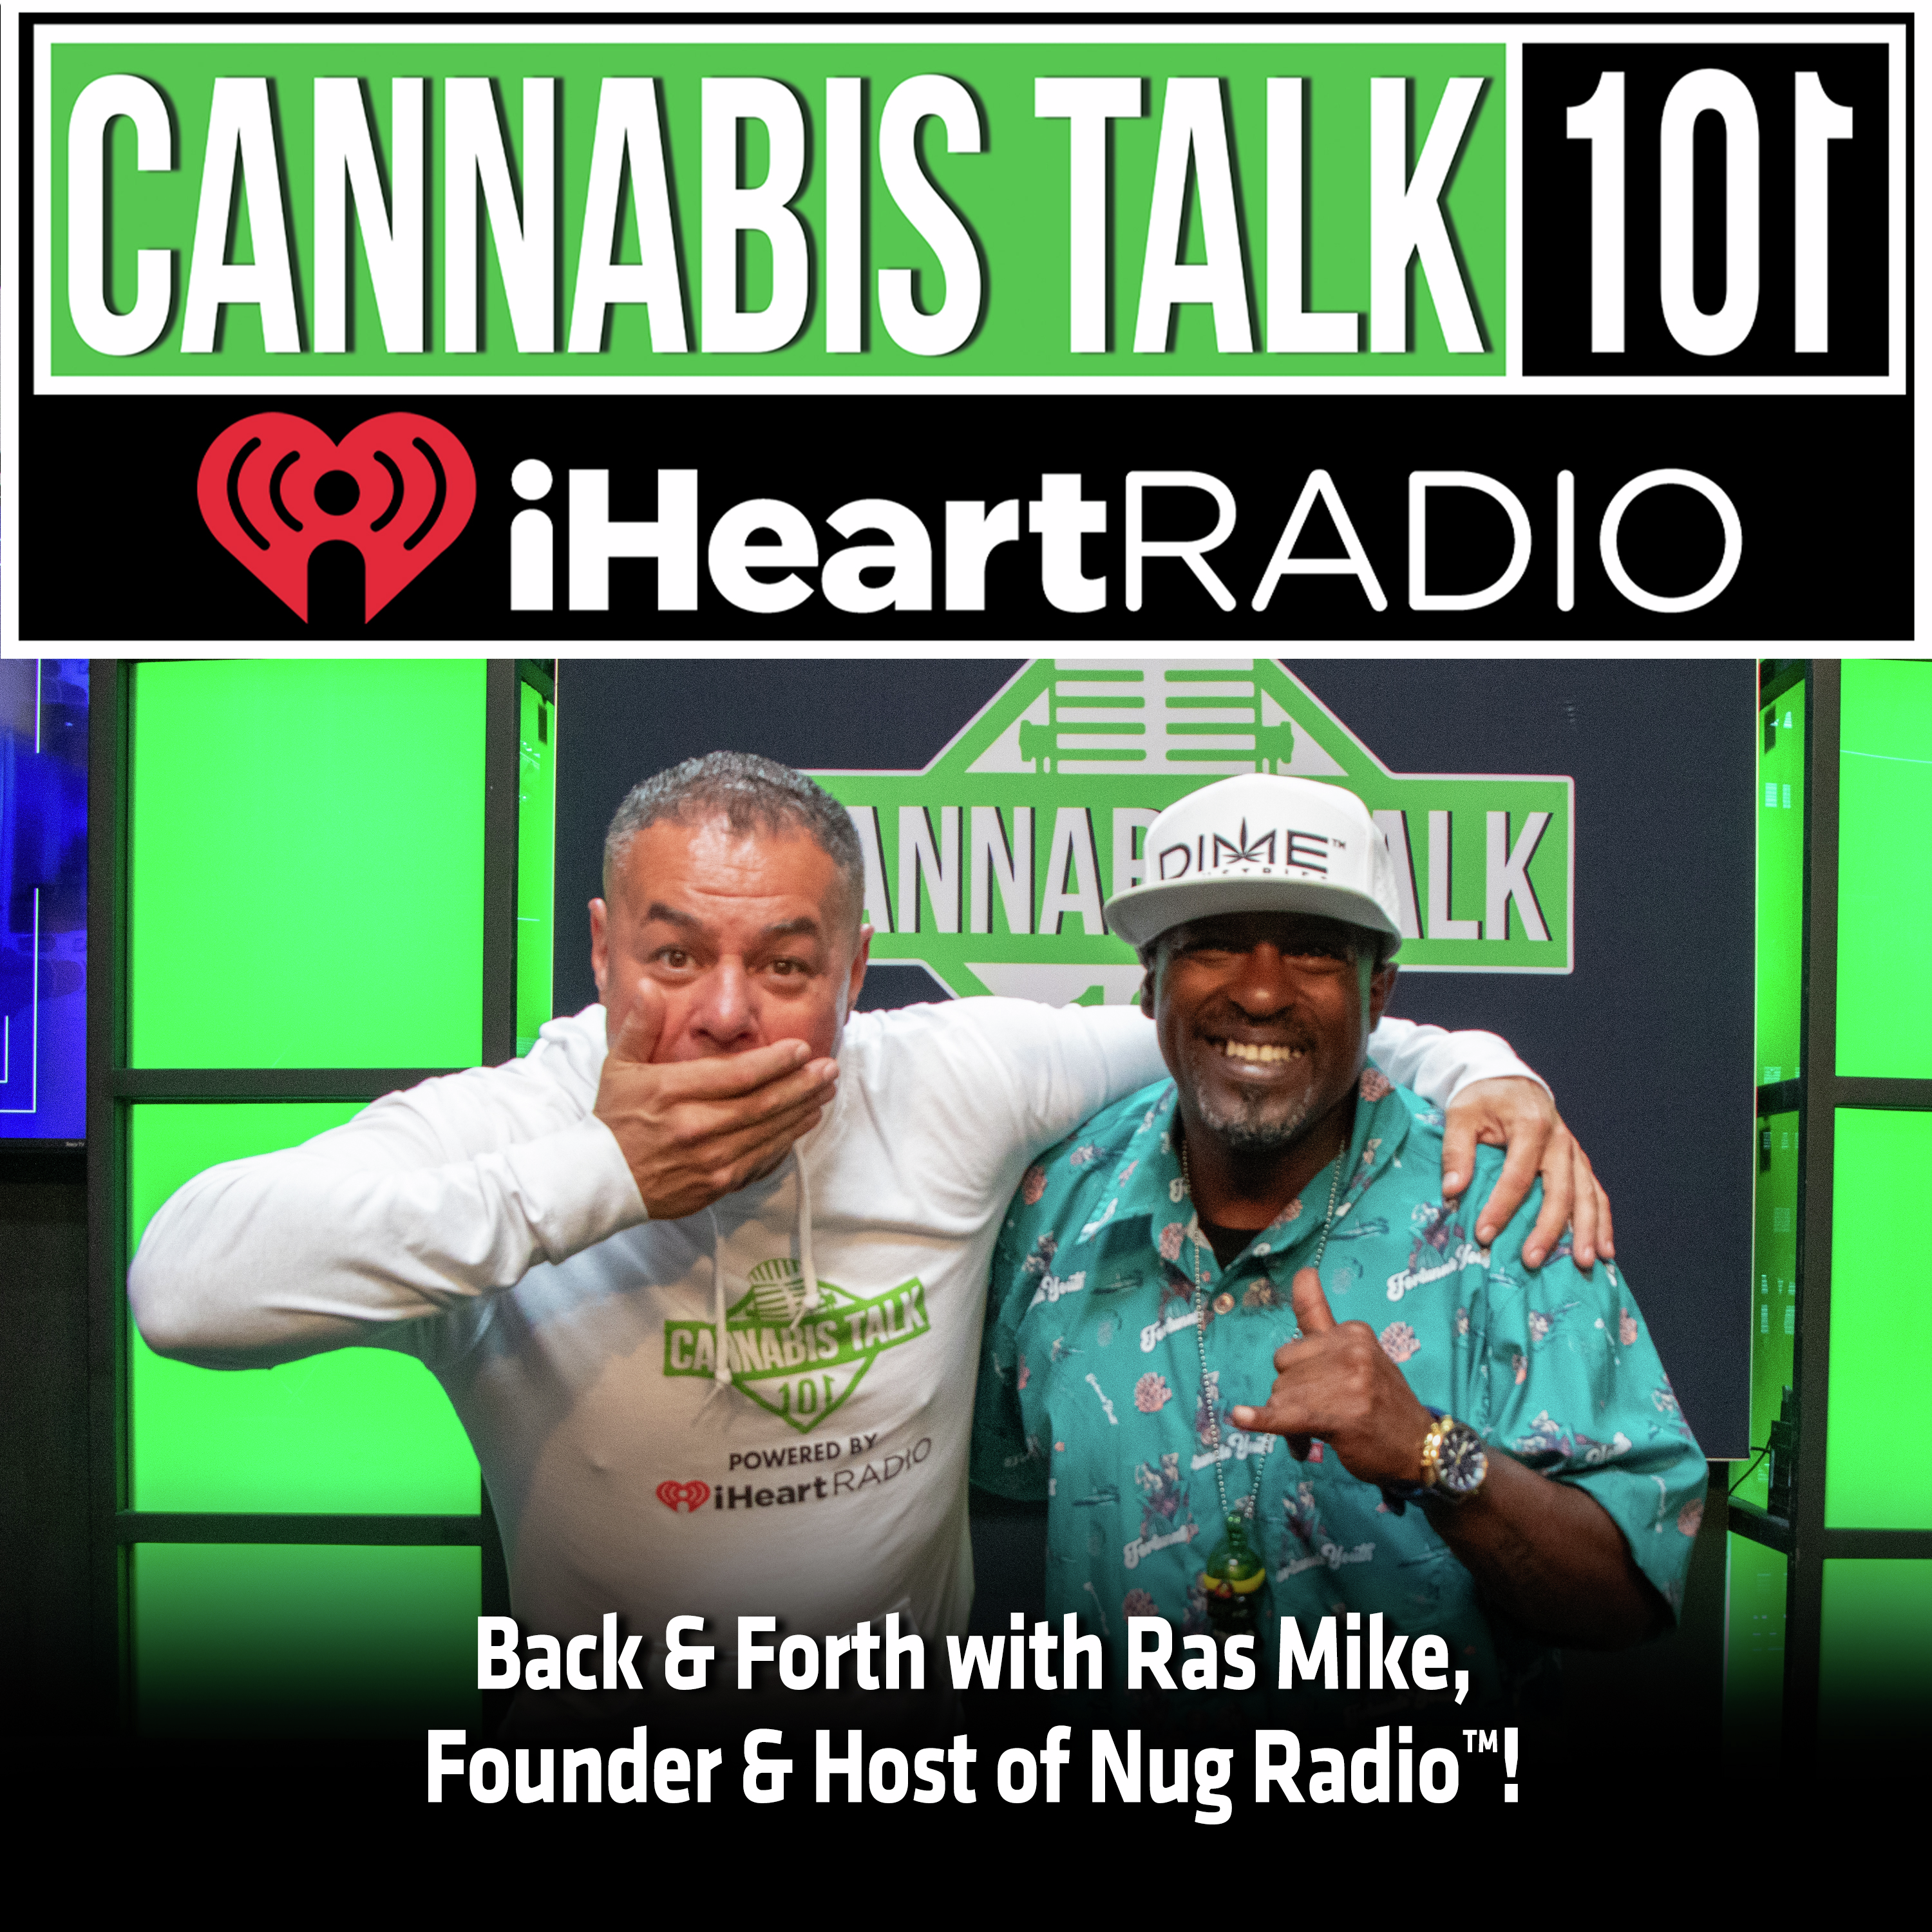 Back & Forth with Ras Mike, Founder & Host of Nug Radio™!